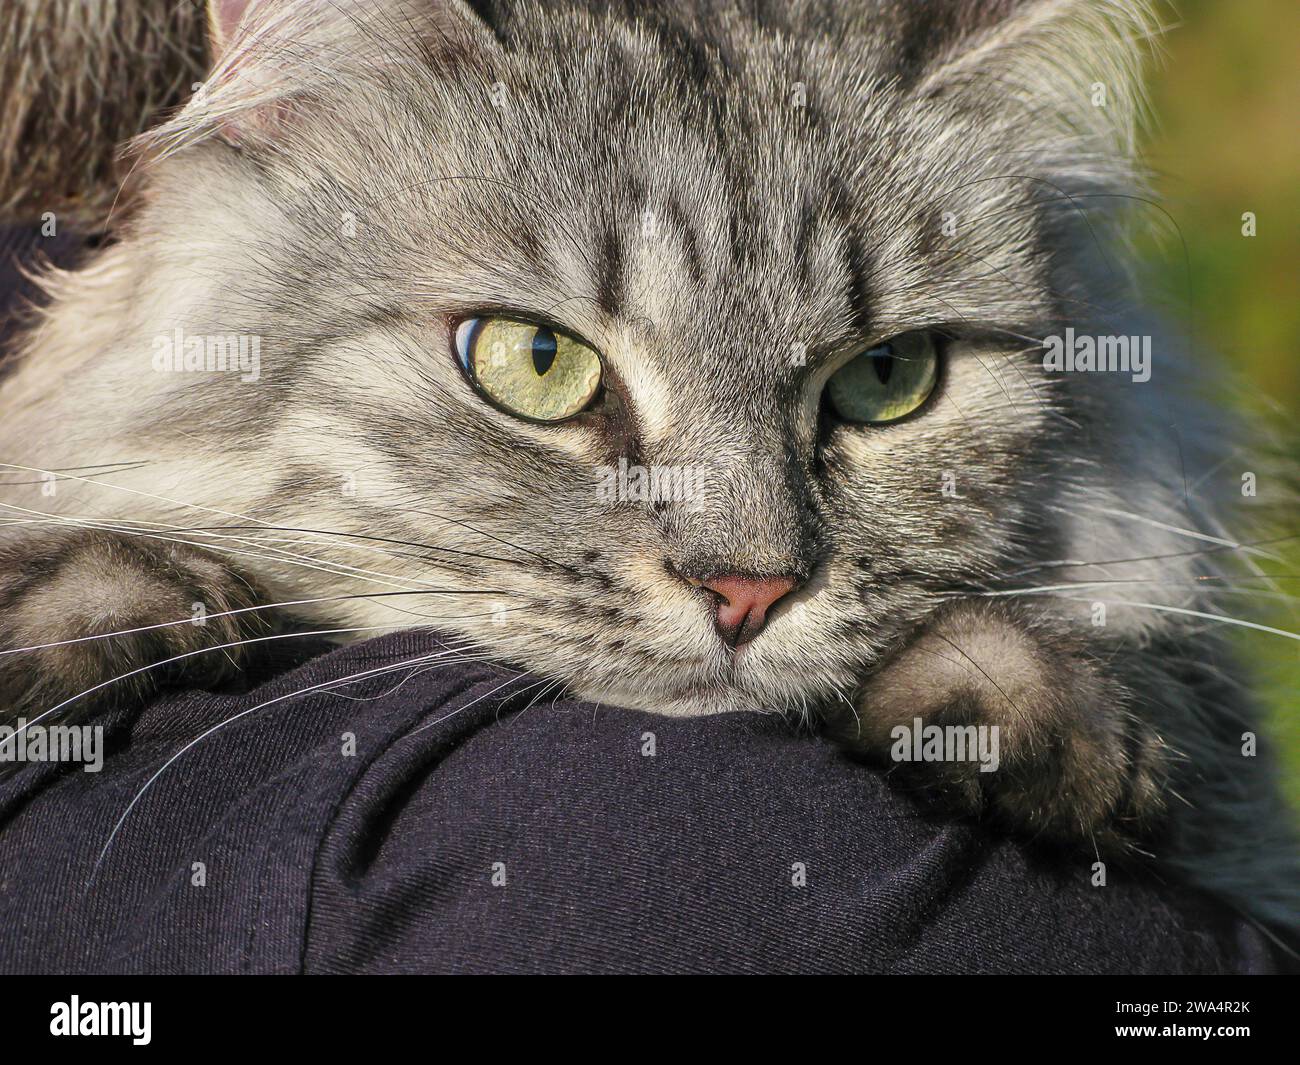 Adorable domestic fluffy grey cat with long whiskers on man's hands Stock Photo